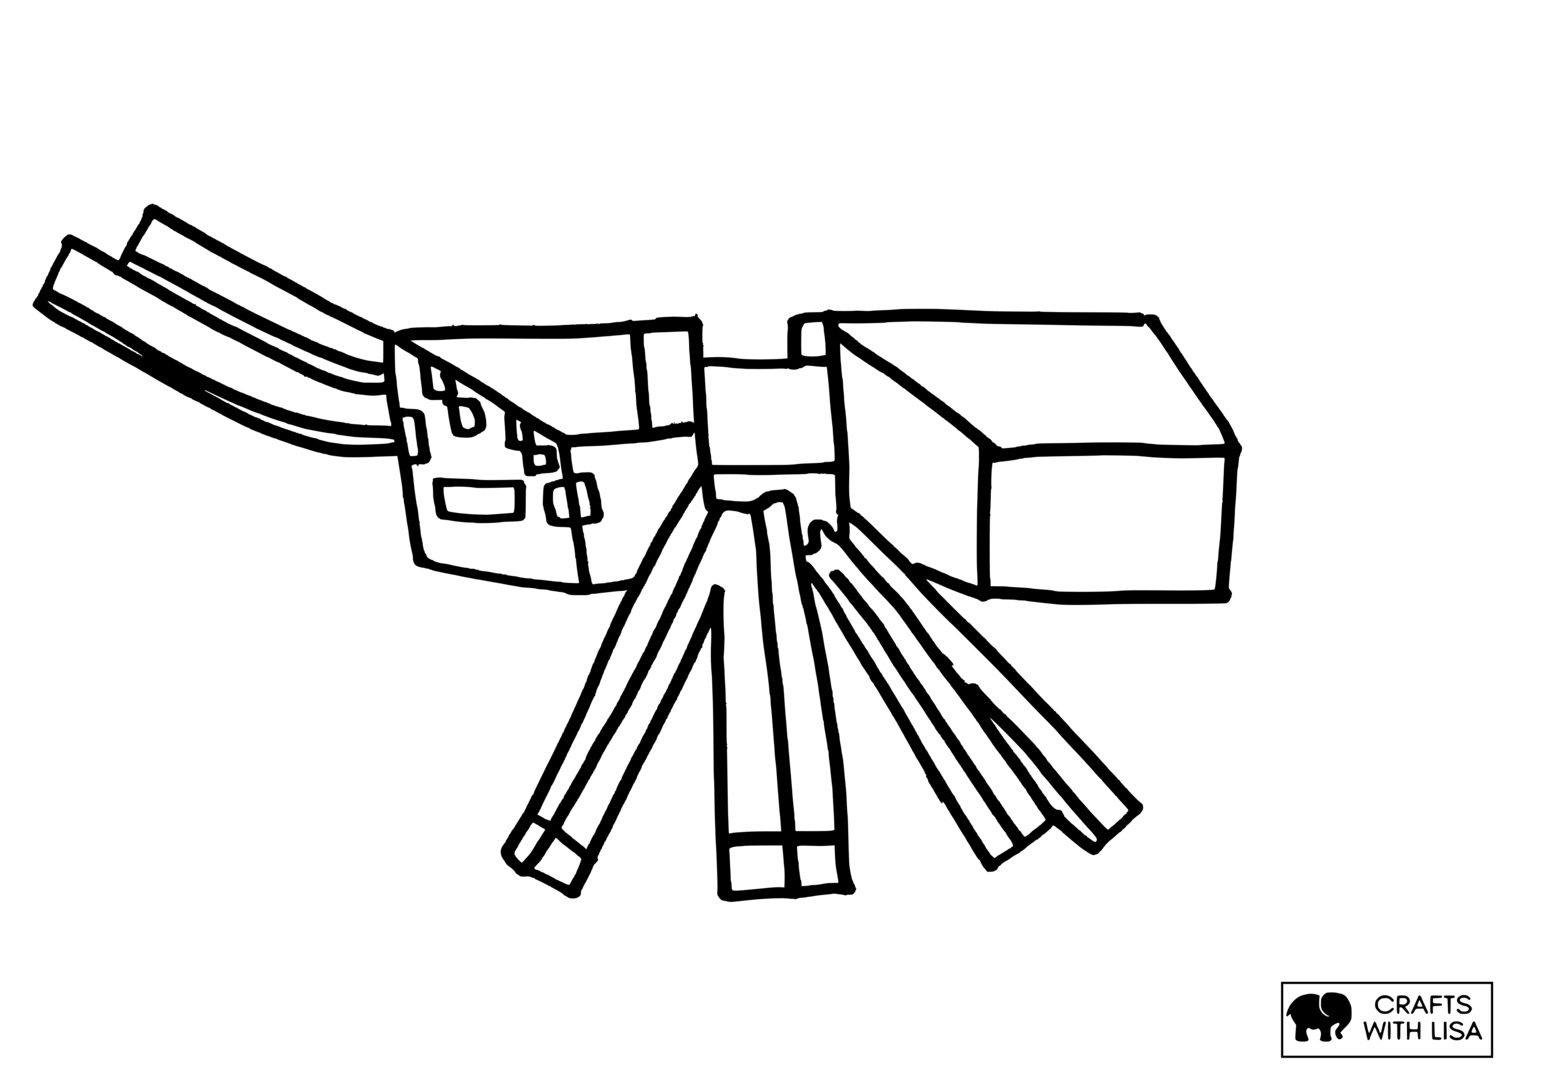 how to draw a minecraft spider